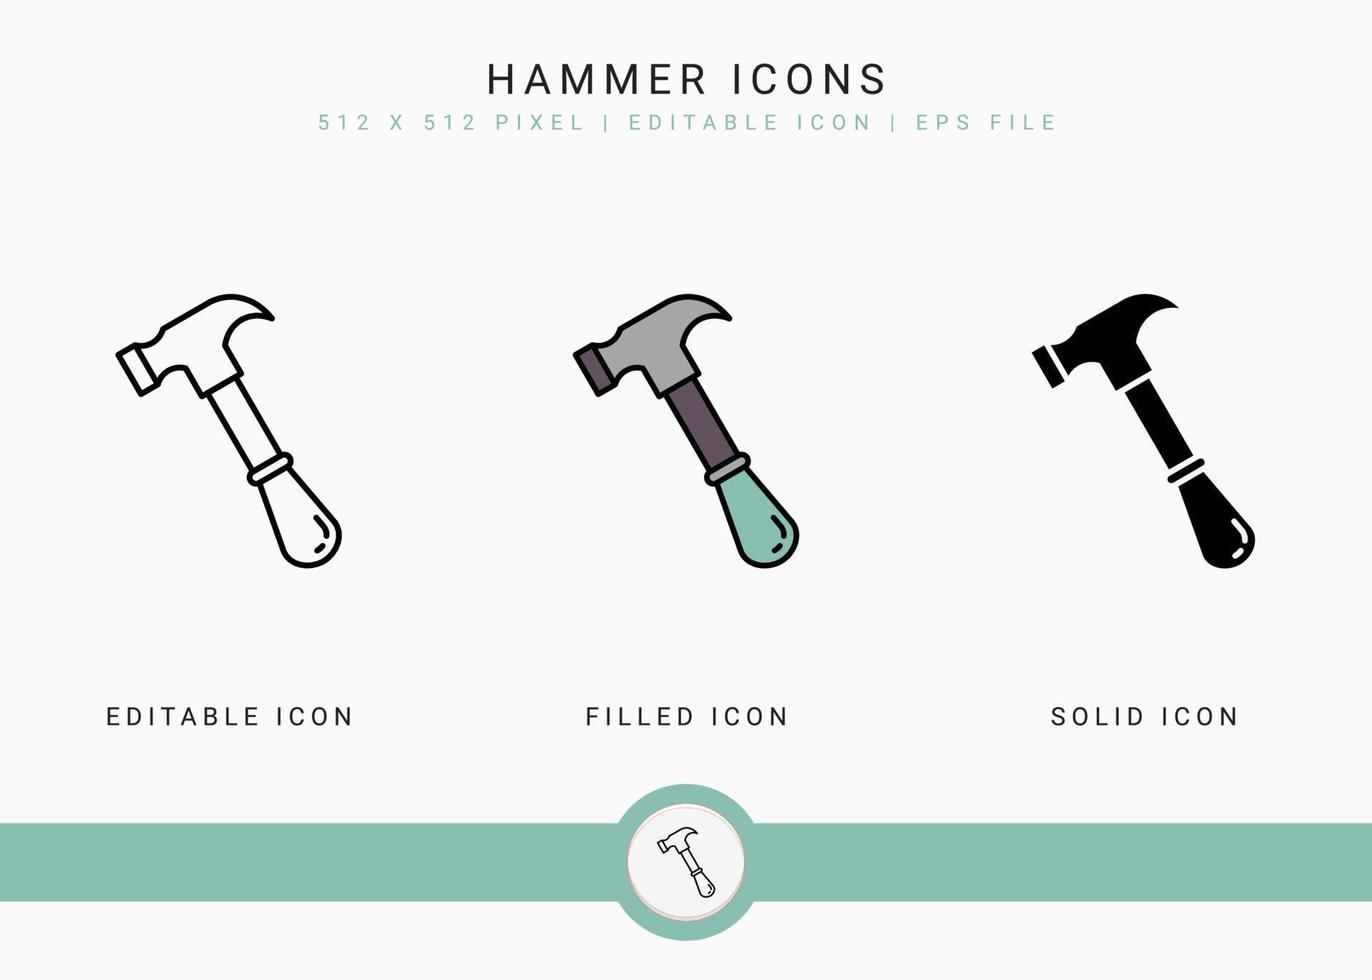 Hammer icons set vector illustration with solid icon line style. Carpenter tool building concept. Editable stroke icon on isolated background for web design, user interface, and mobile application